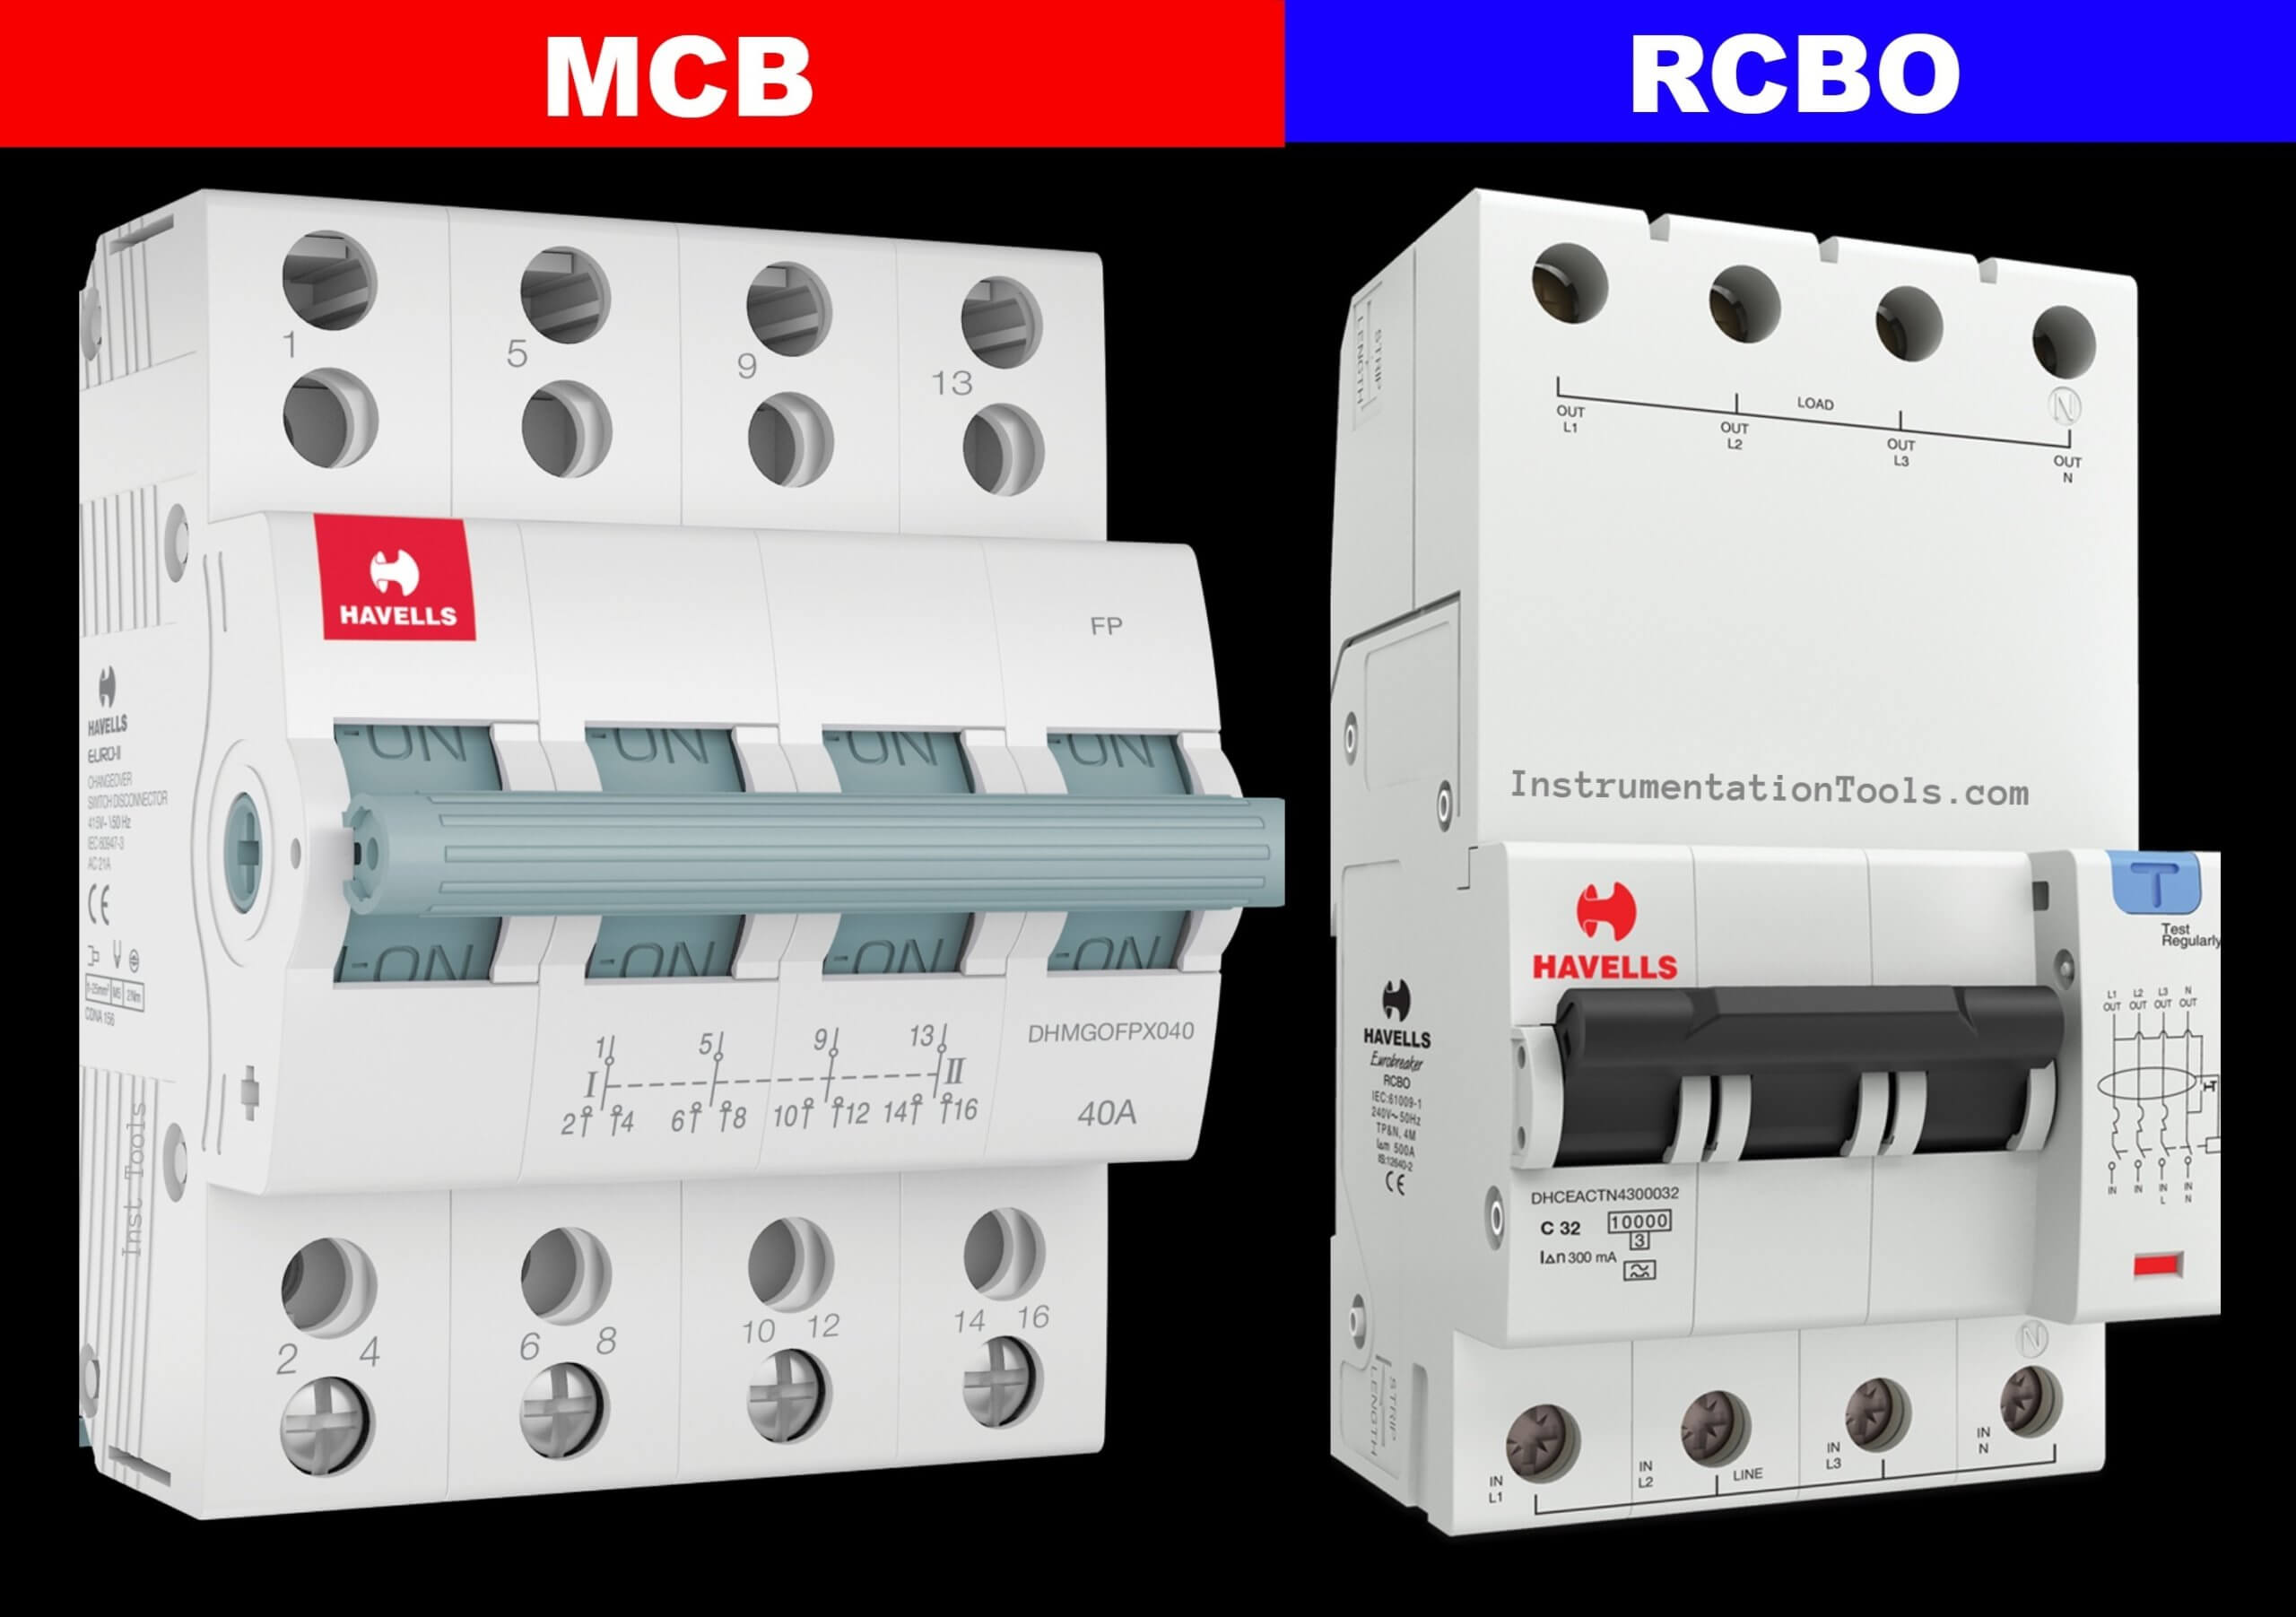 Difference between MCB and RCBO